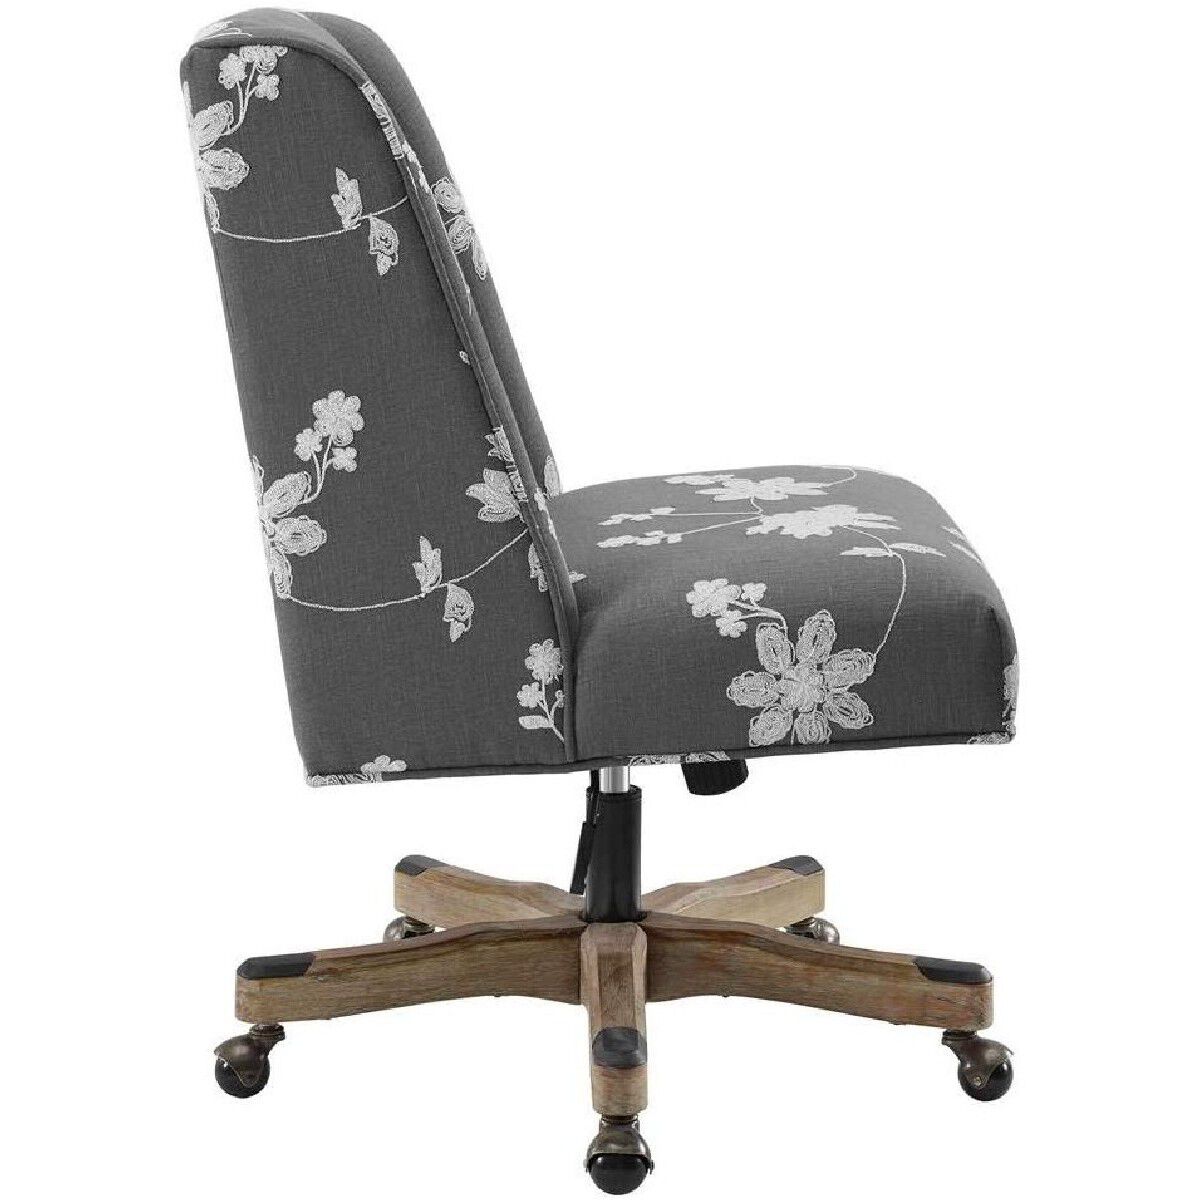 Floral Embroidered Fabric Upholstered Office Chair, Gray and White